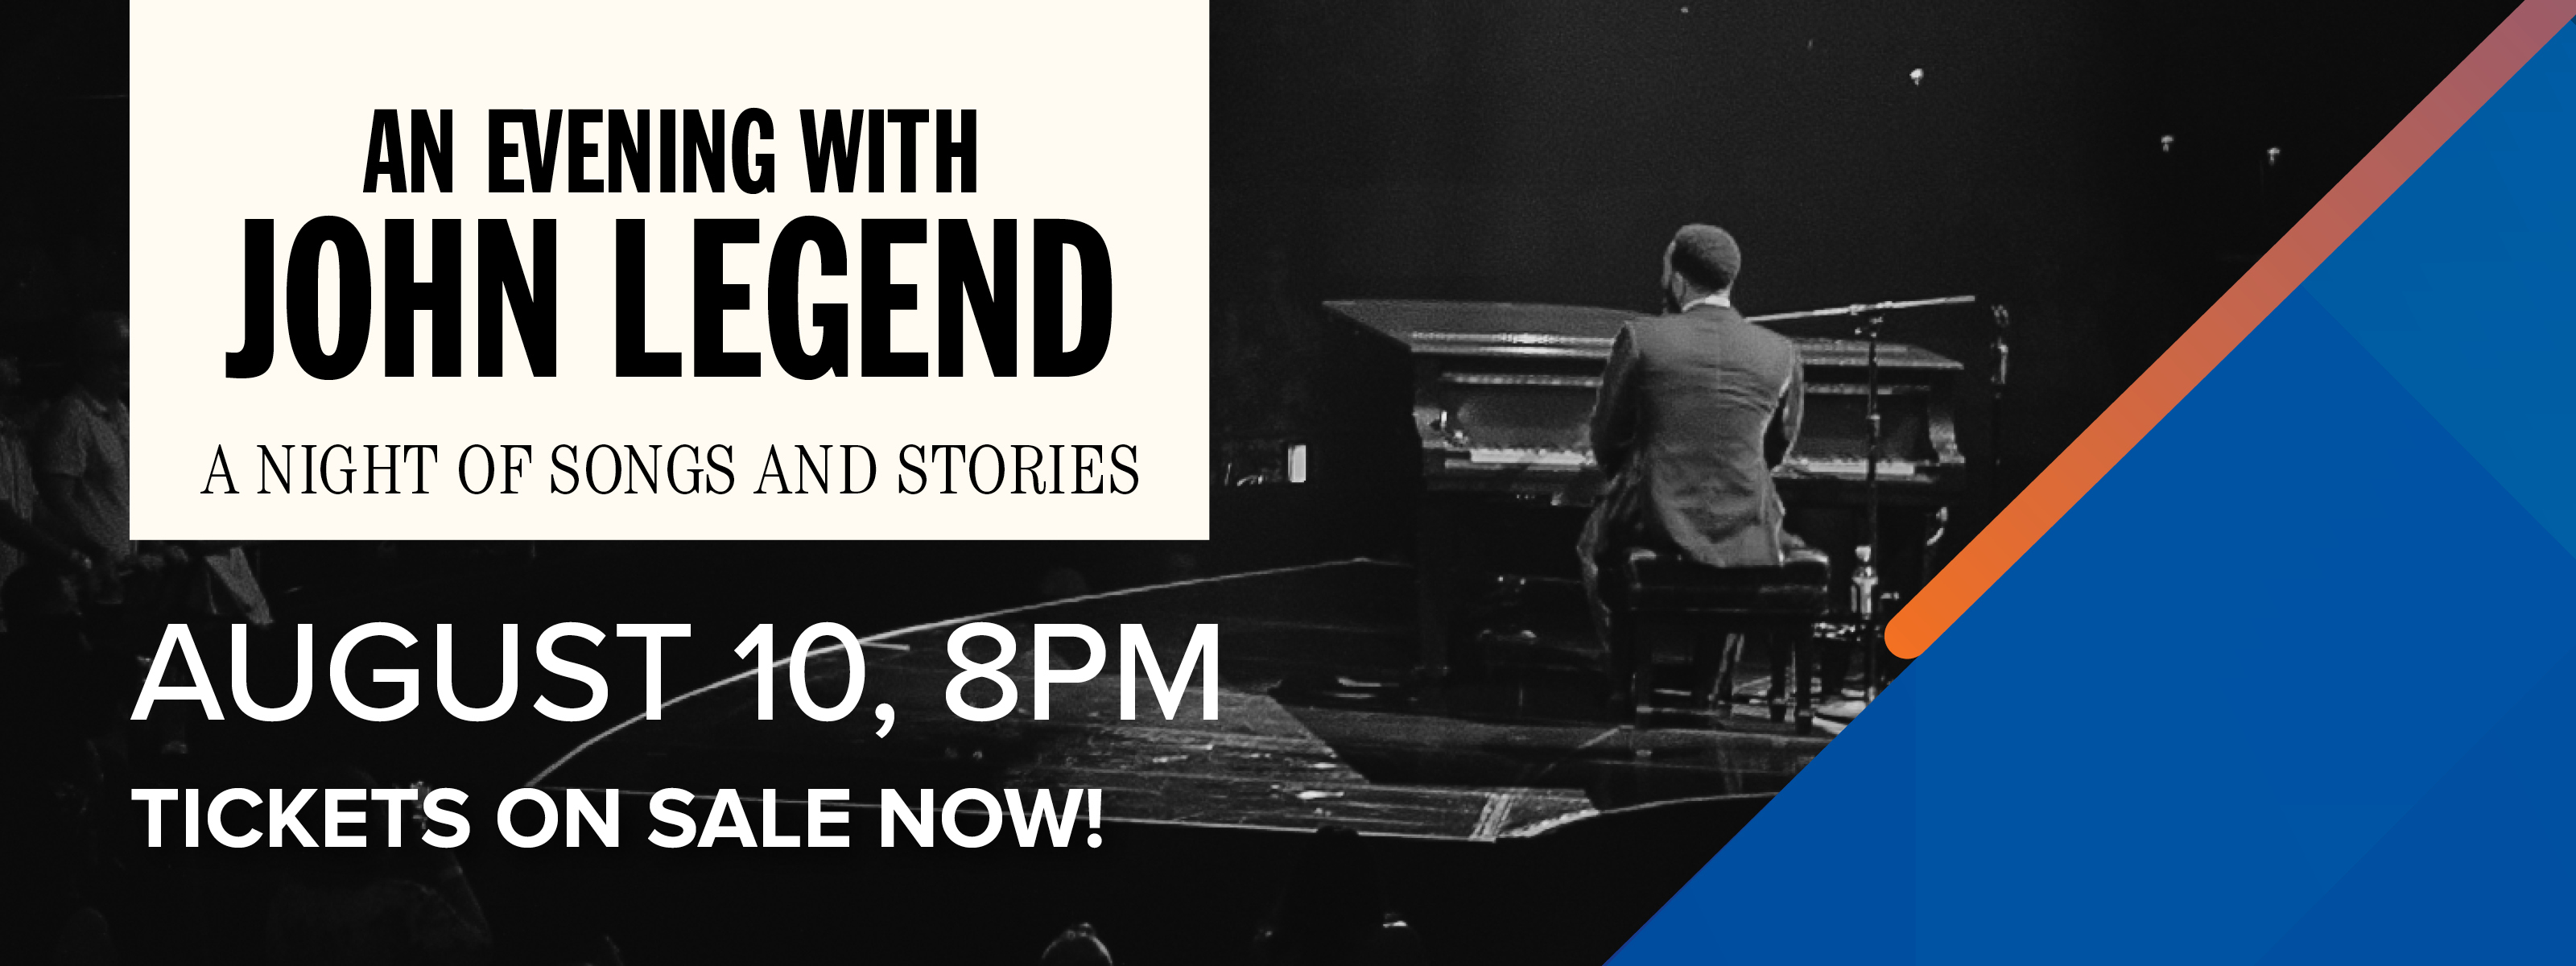 John Legend August 10 at 8PM Tickets On Sale Now